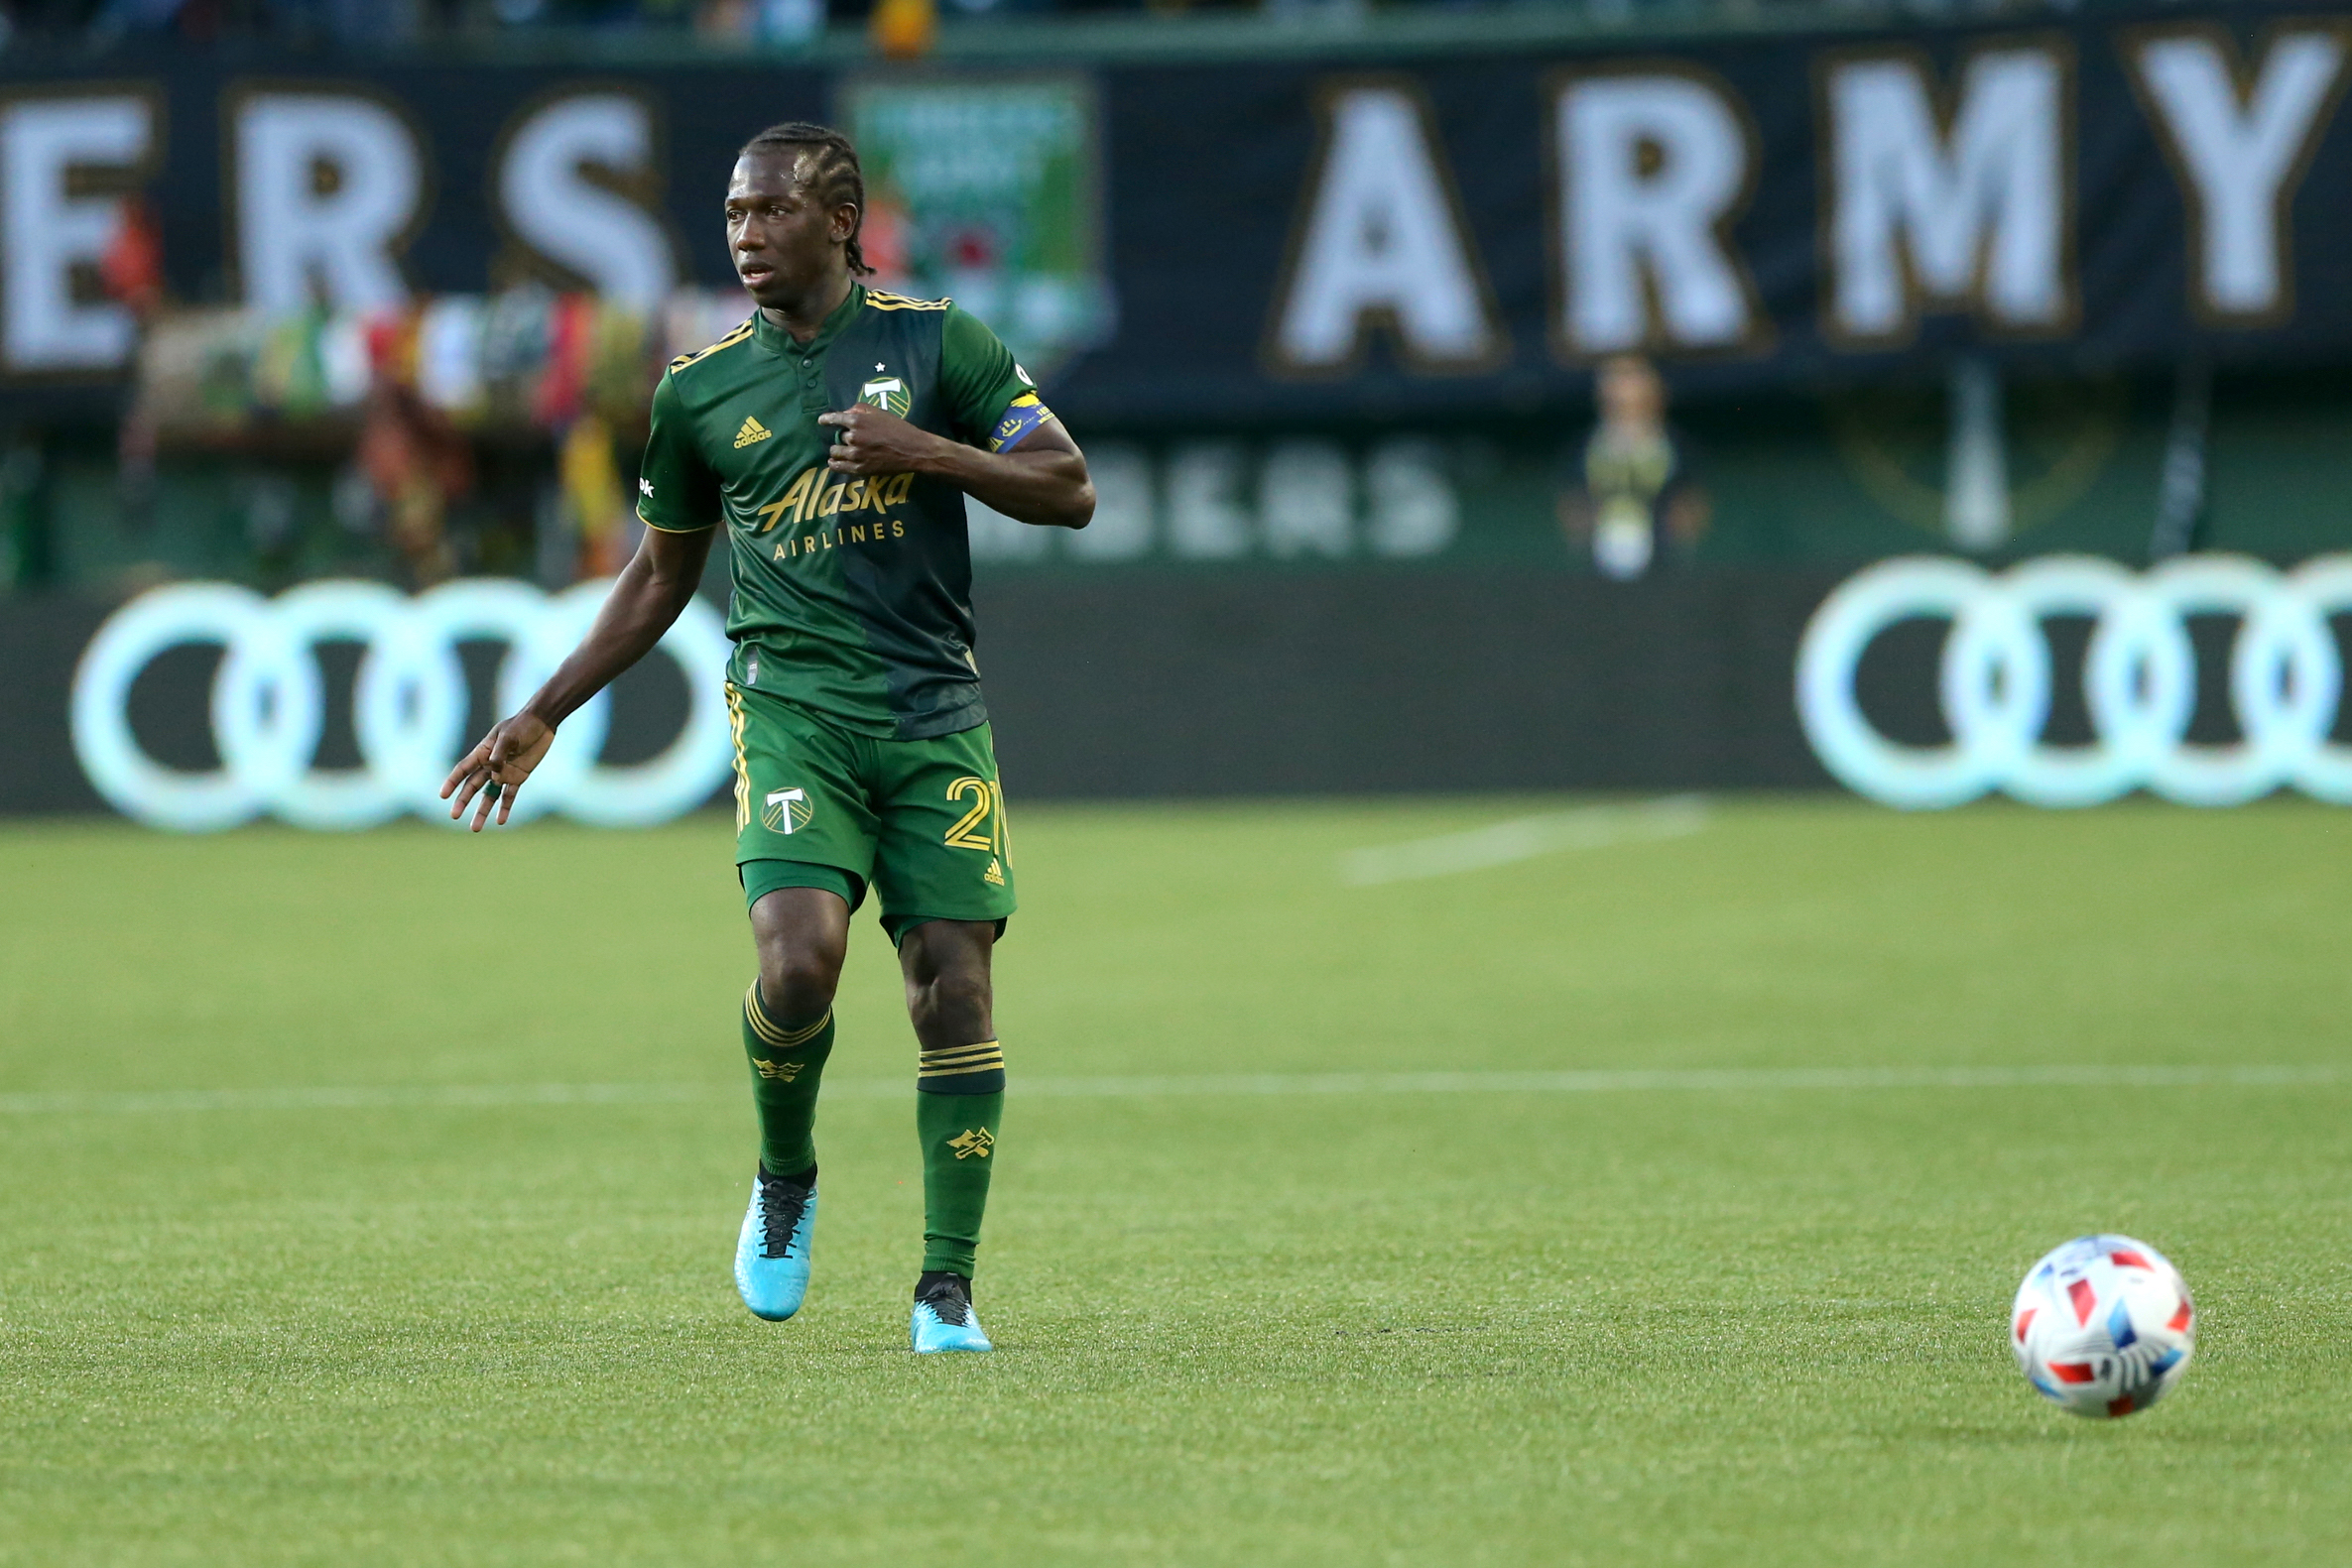 Portland Timbers 2022 preview: Diego Chara still going strong